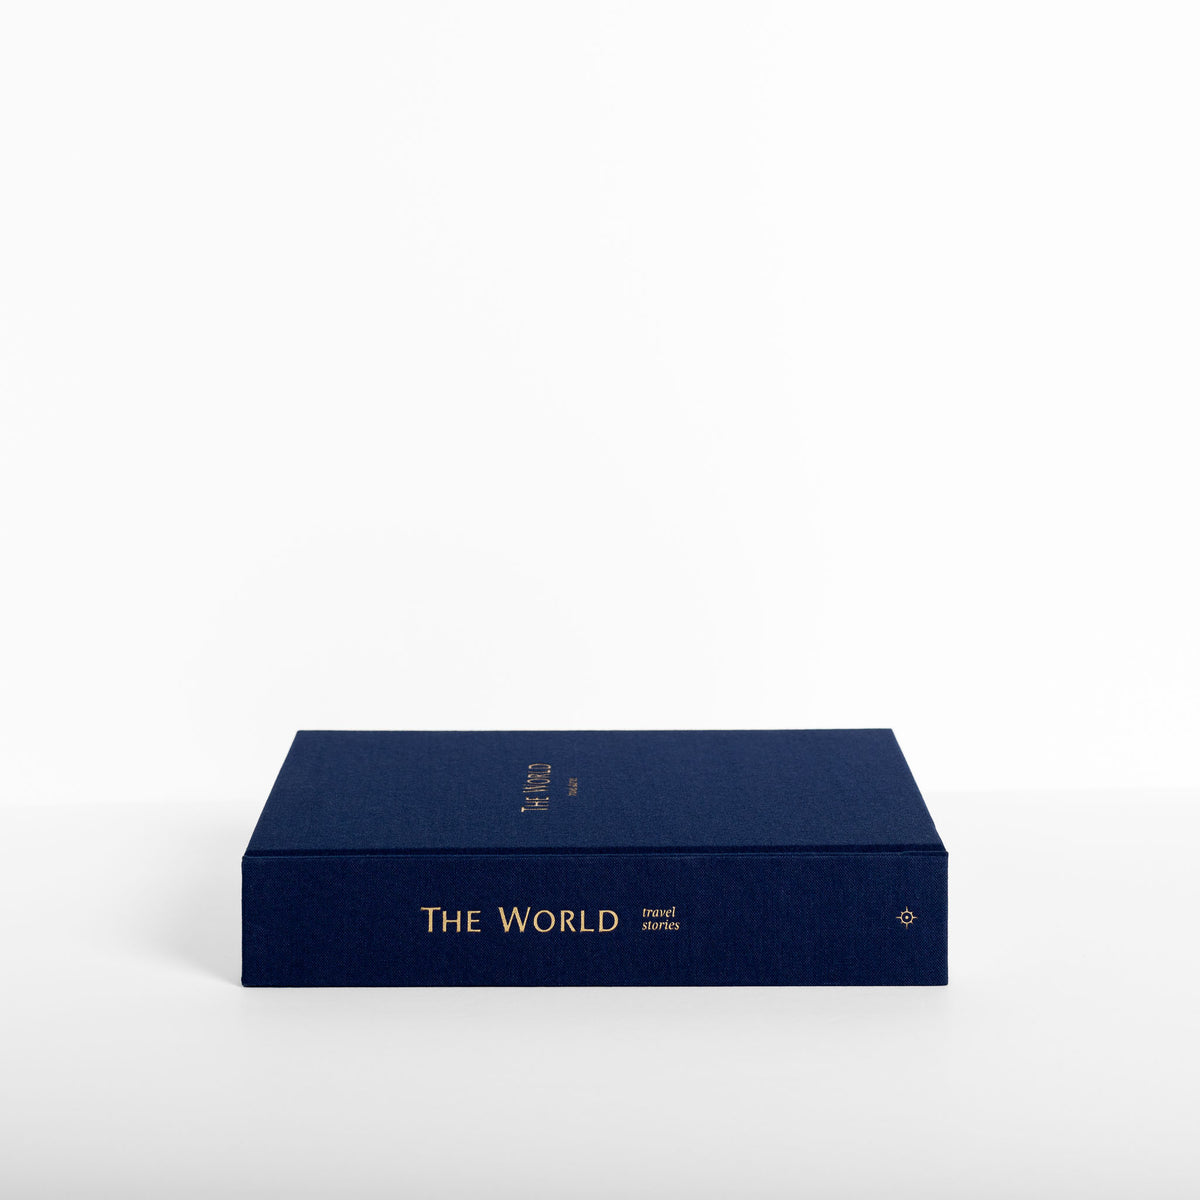 THE WORLD TRAVEL JOURNAL - Graphic Image - with Box!